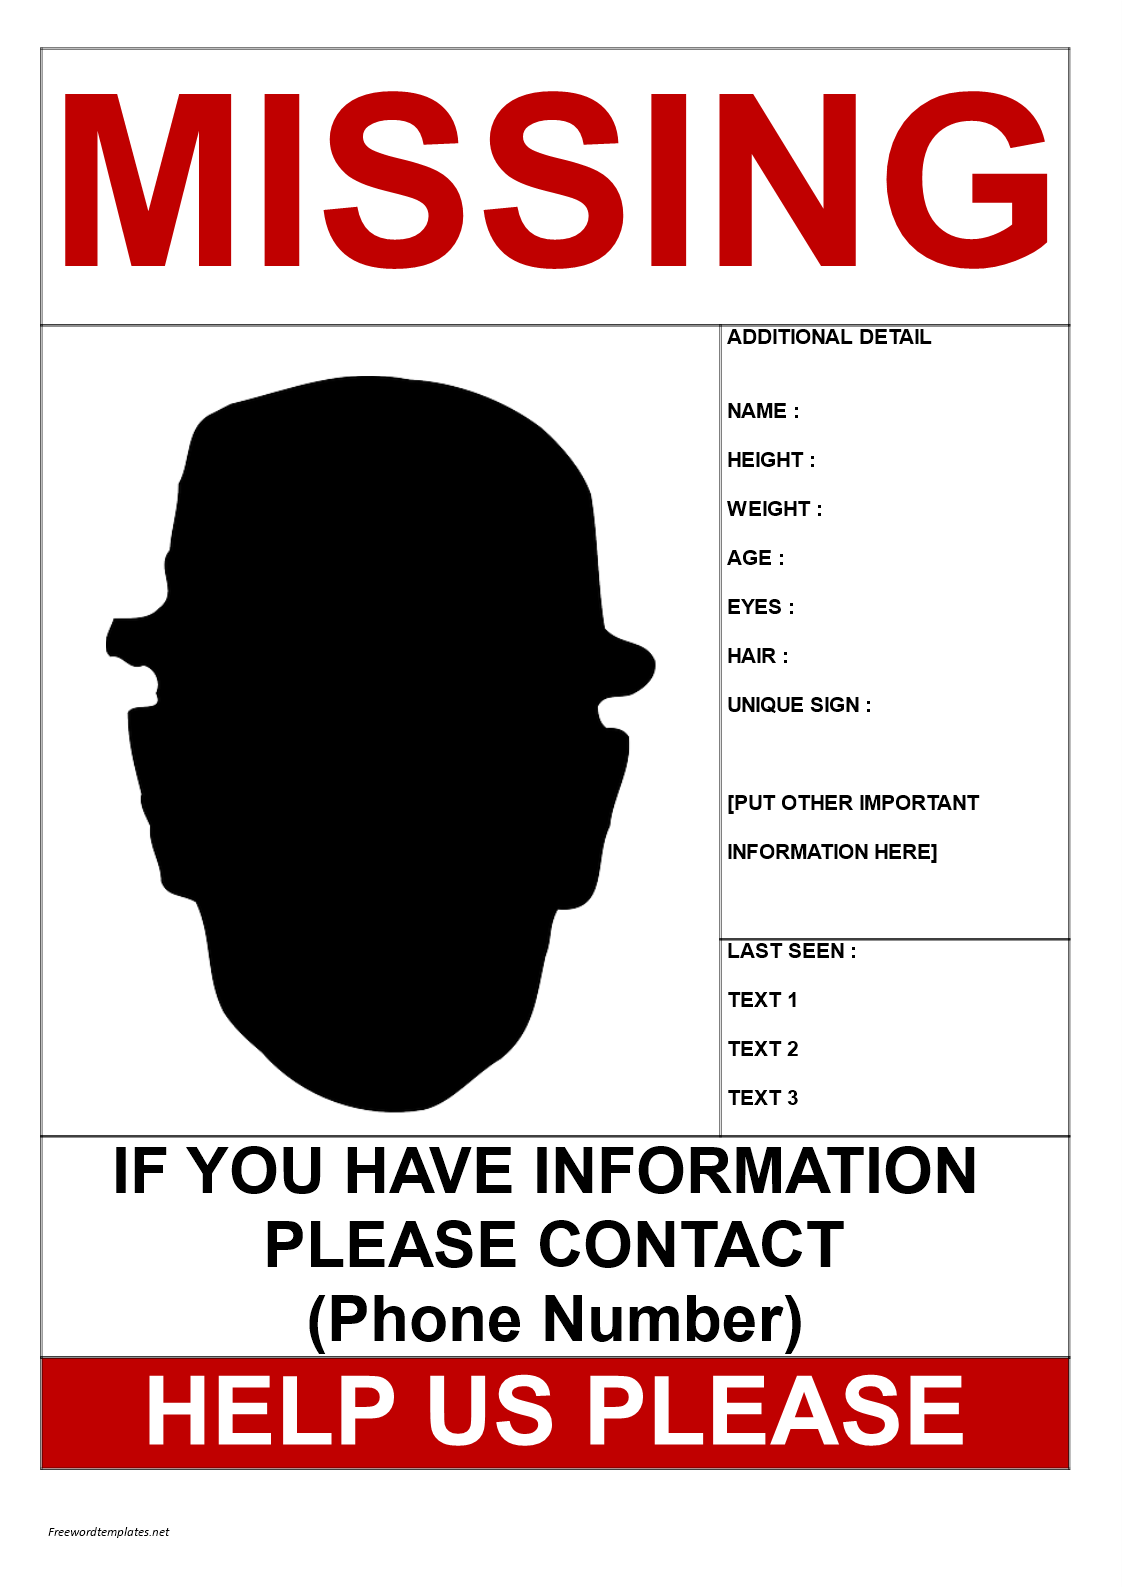 Missing Person Poster Help Us Please A3 Size main image